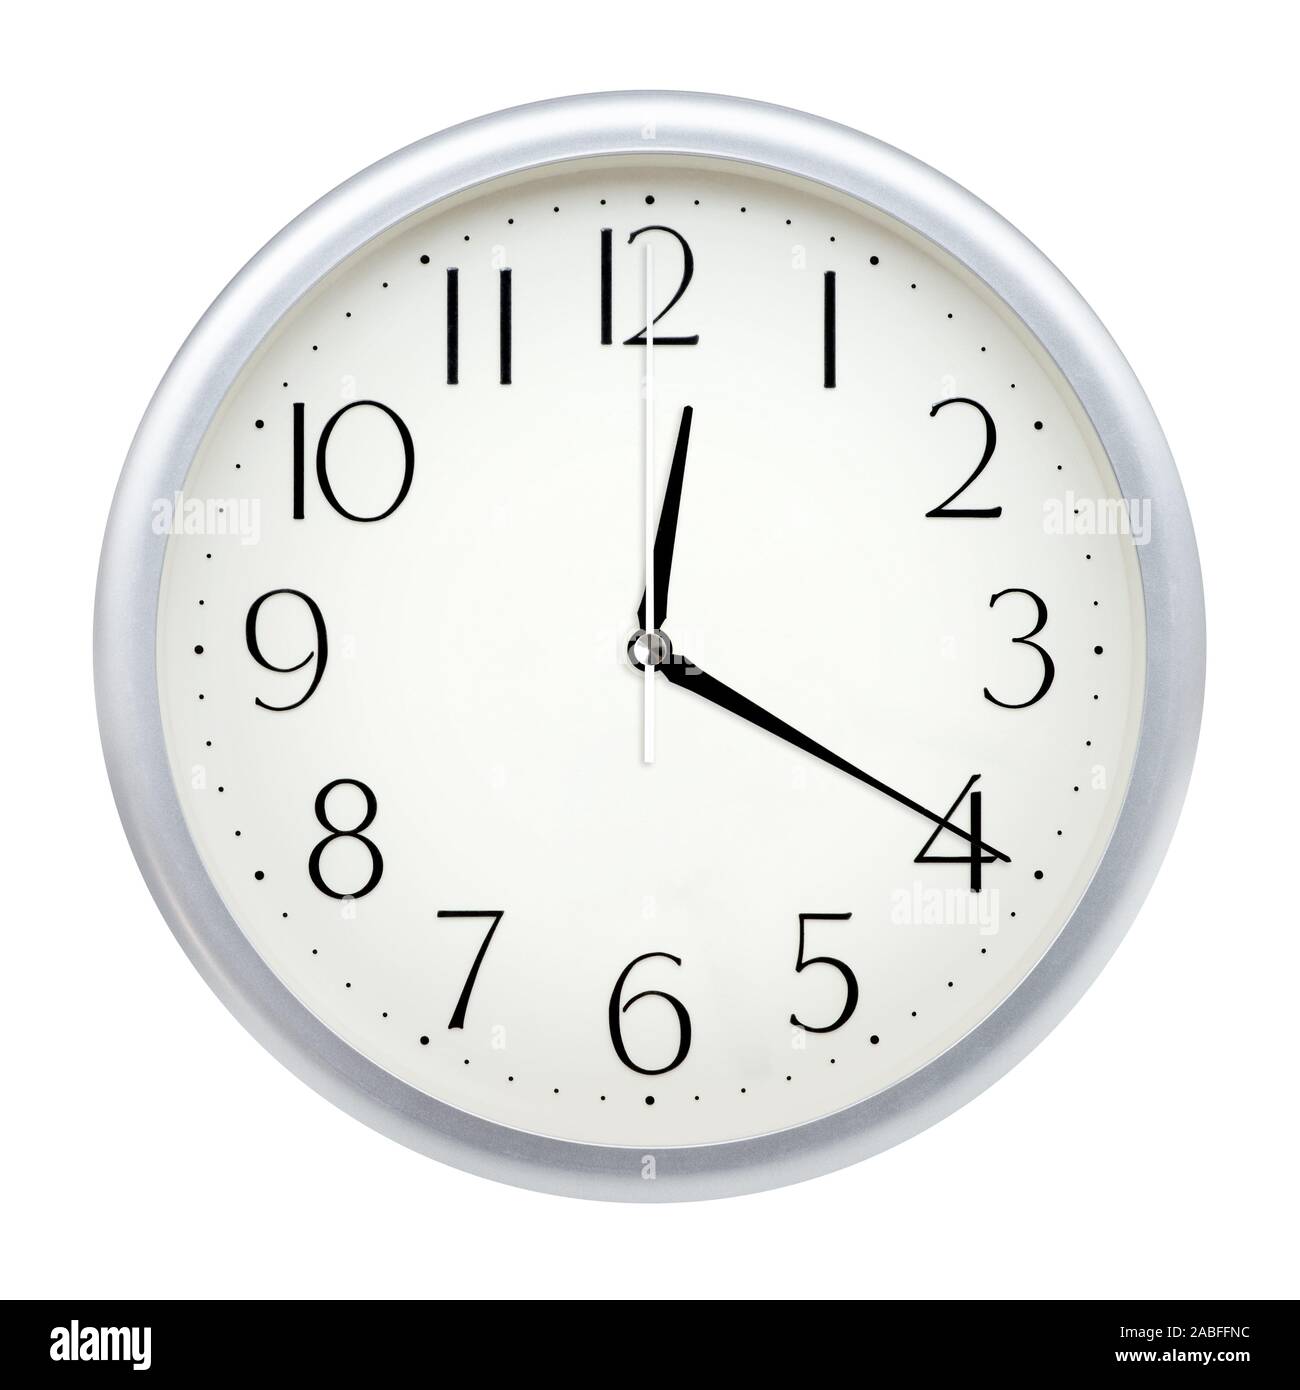 12 20 clock Cut Out Stock Images & Pictures - Alamy